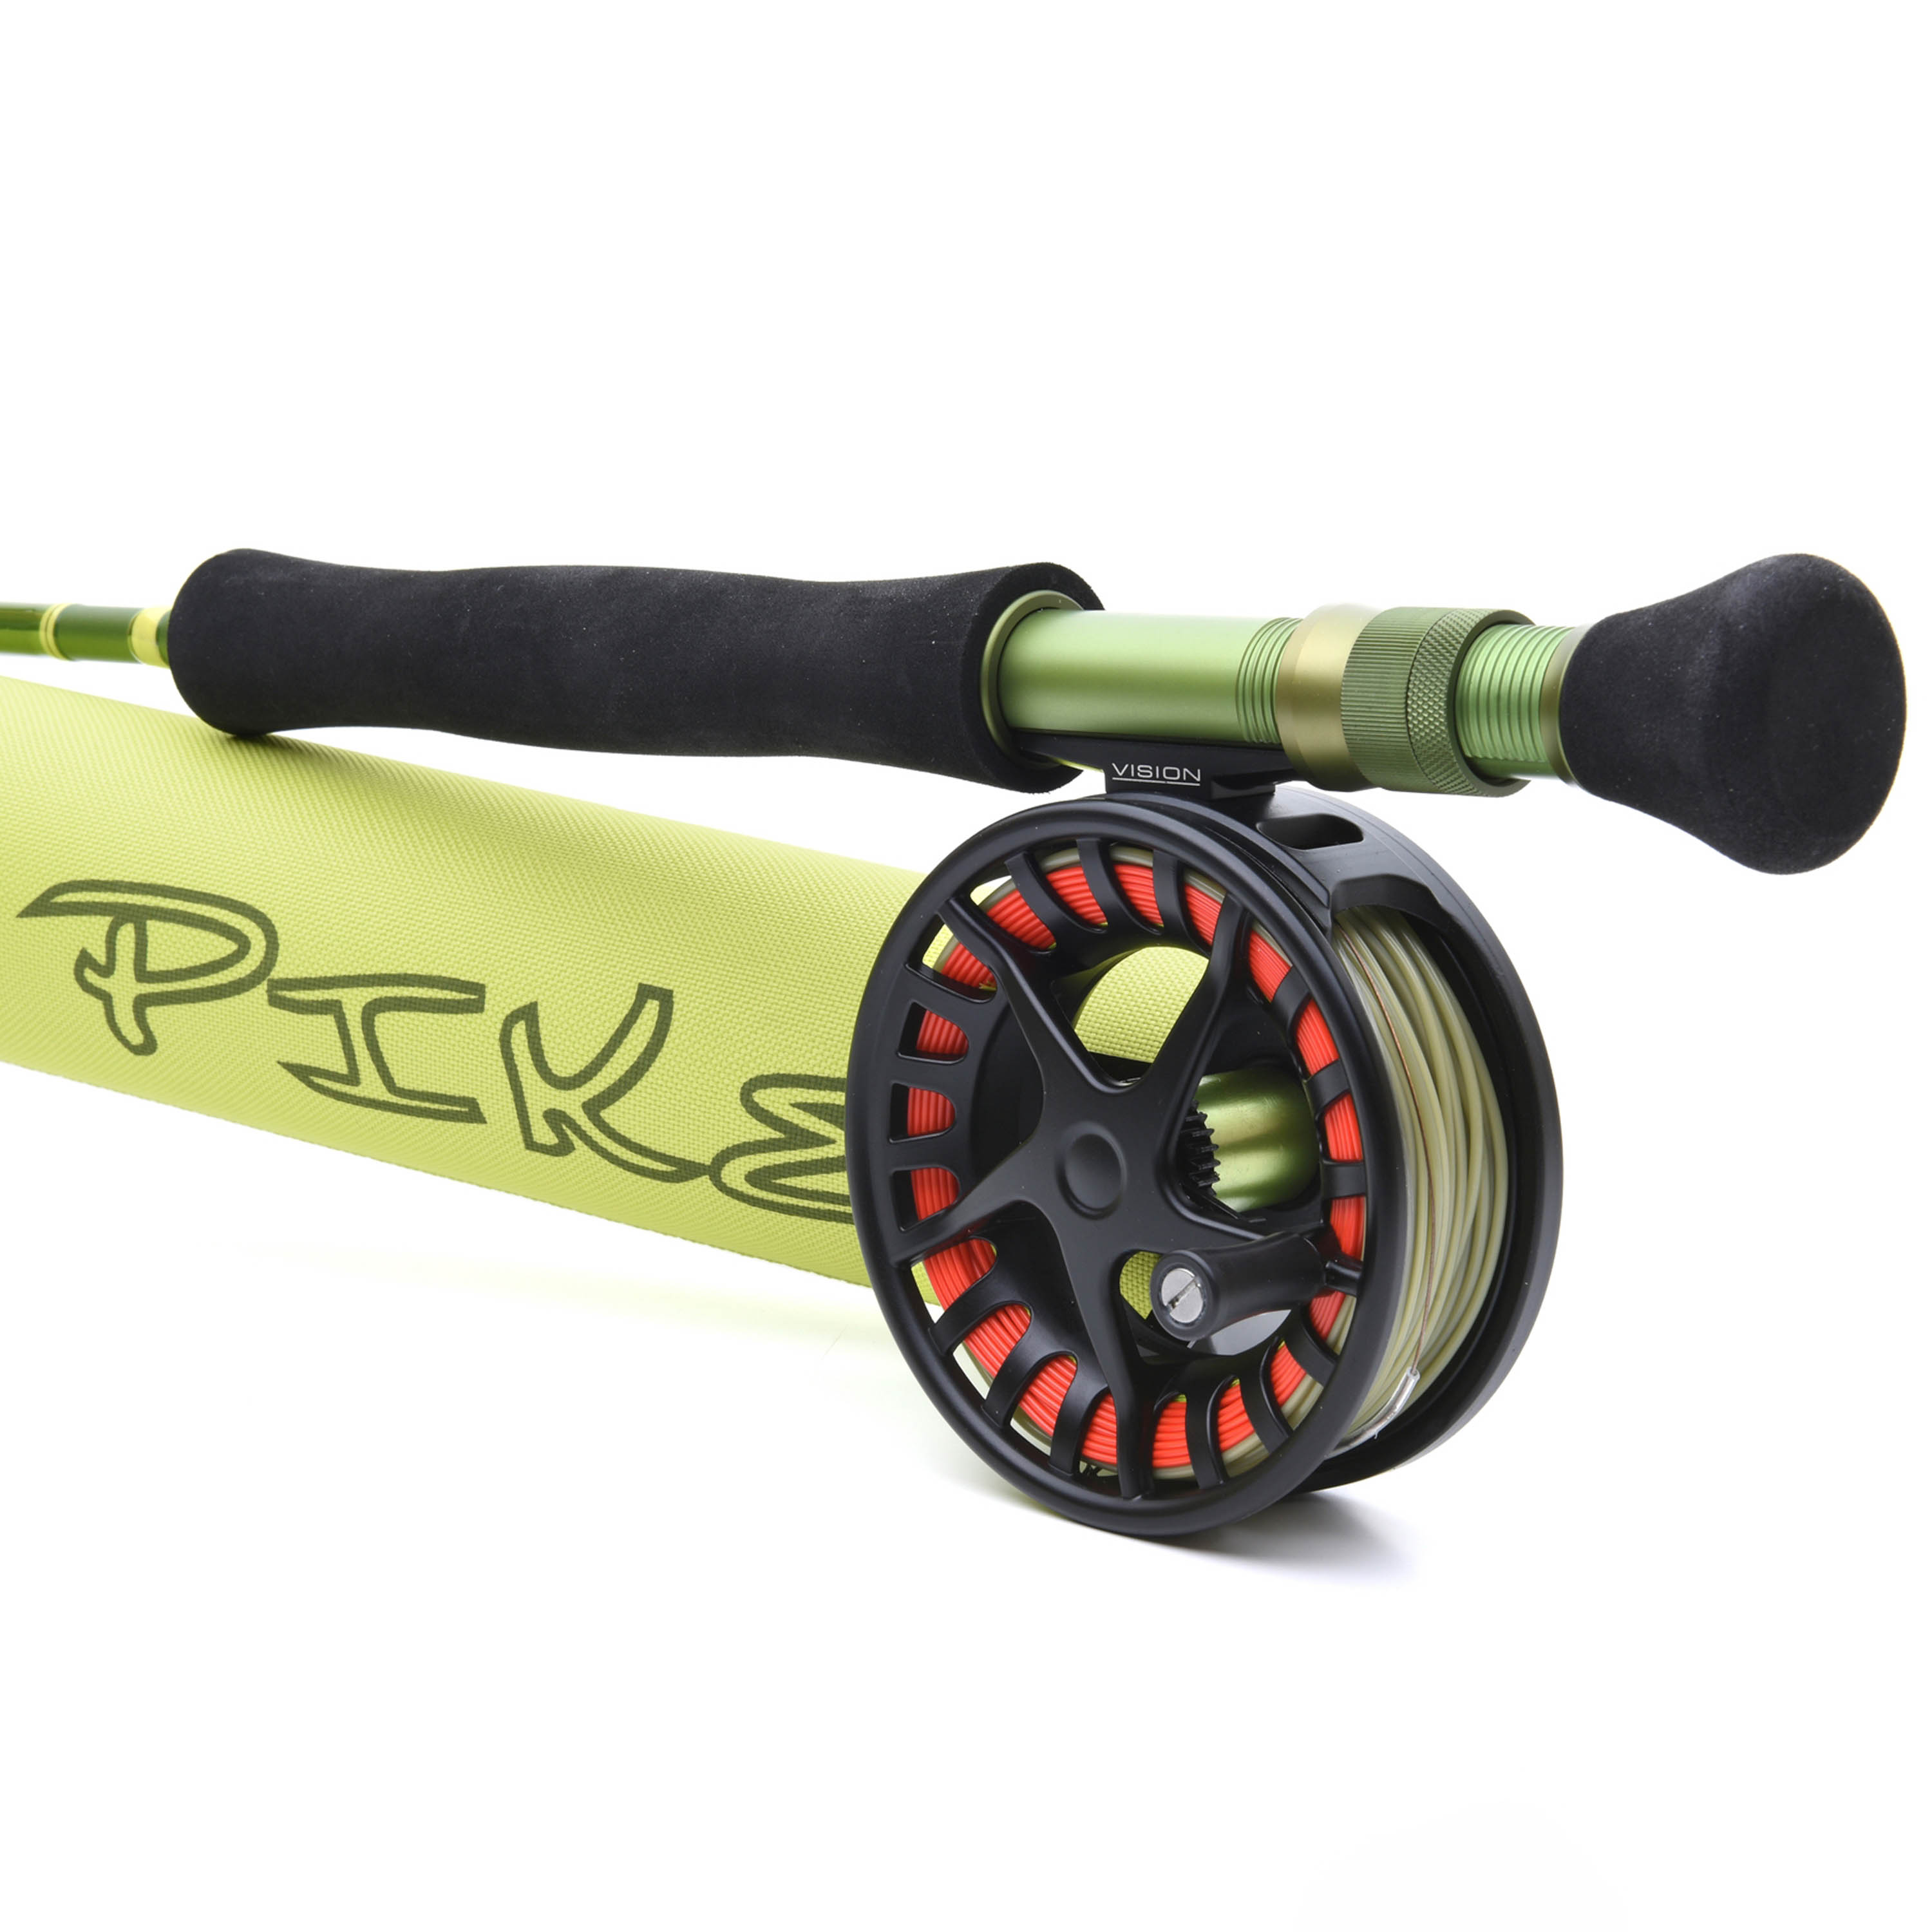 Vision Pike Fly Outfit – Guide Flyfishing, Fly Fishing Rods, Reels, Sage, Redington, RIO